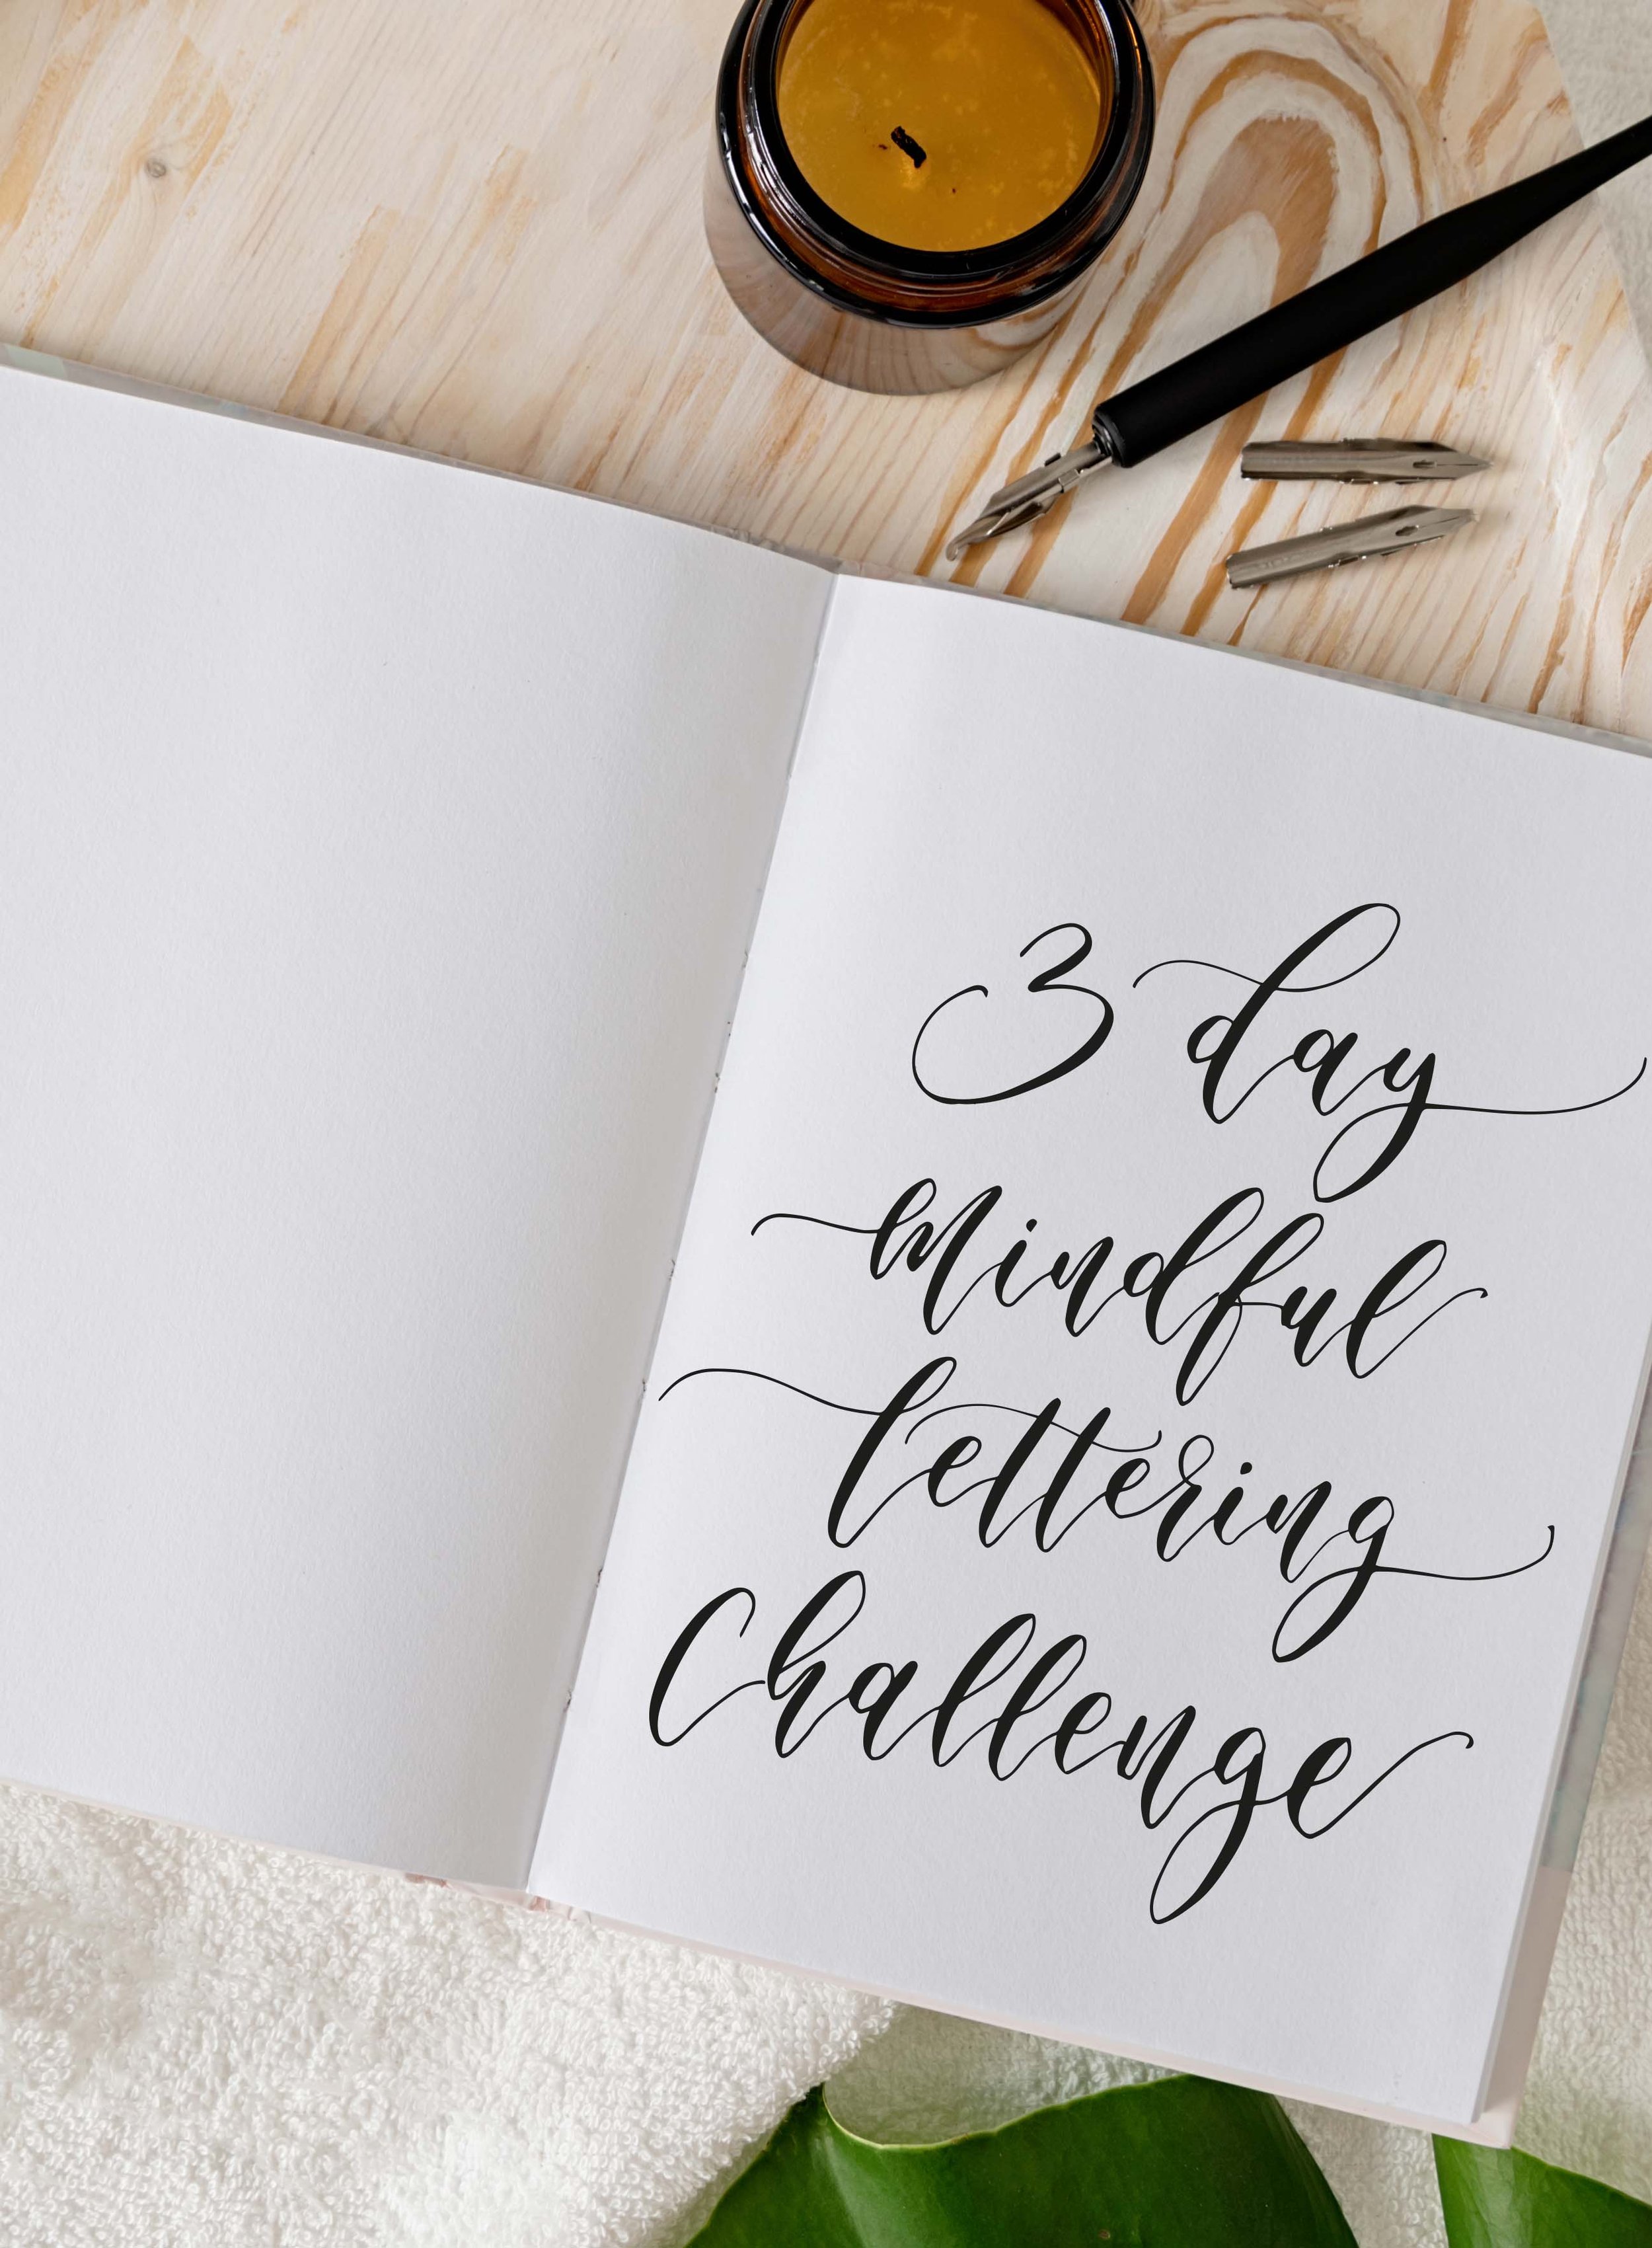 Mindfulness challenge - Modern Calligraphy Kits and Classes